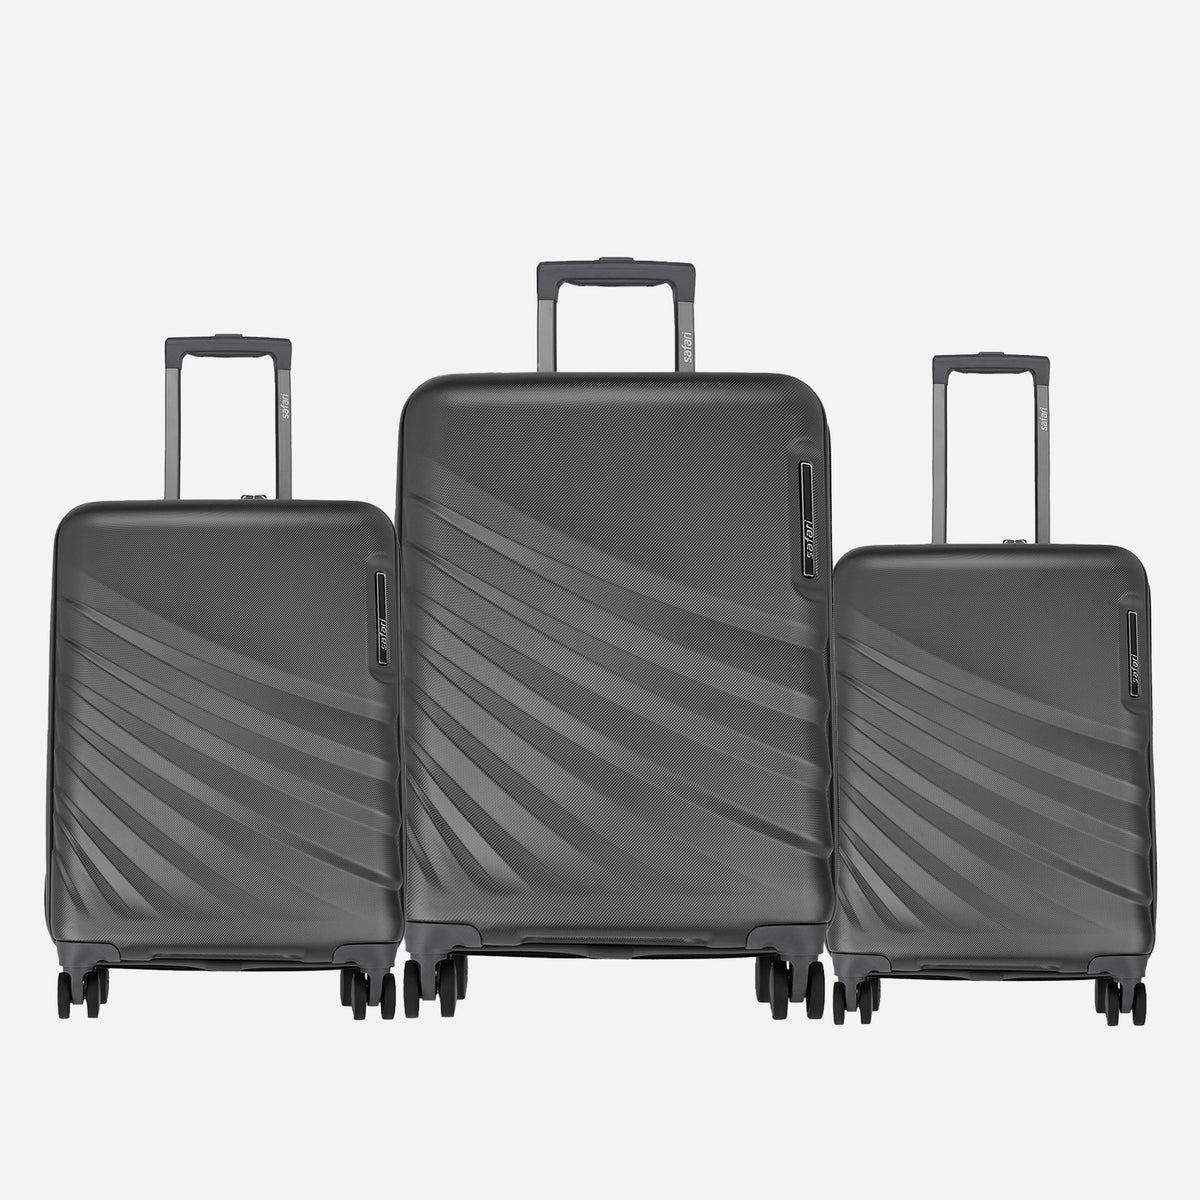 Safari Polaris Pro Castle Black Trolley Bag Combo of Small medium and large with TSA Lock, Dual wheels, Side Hooks and Wet Pouch